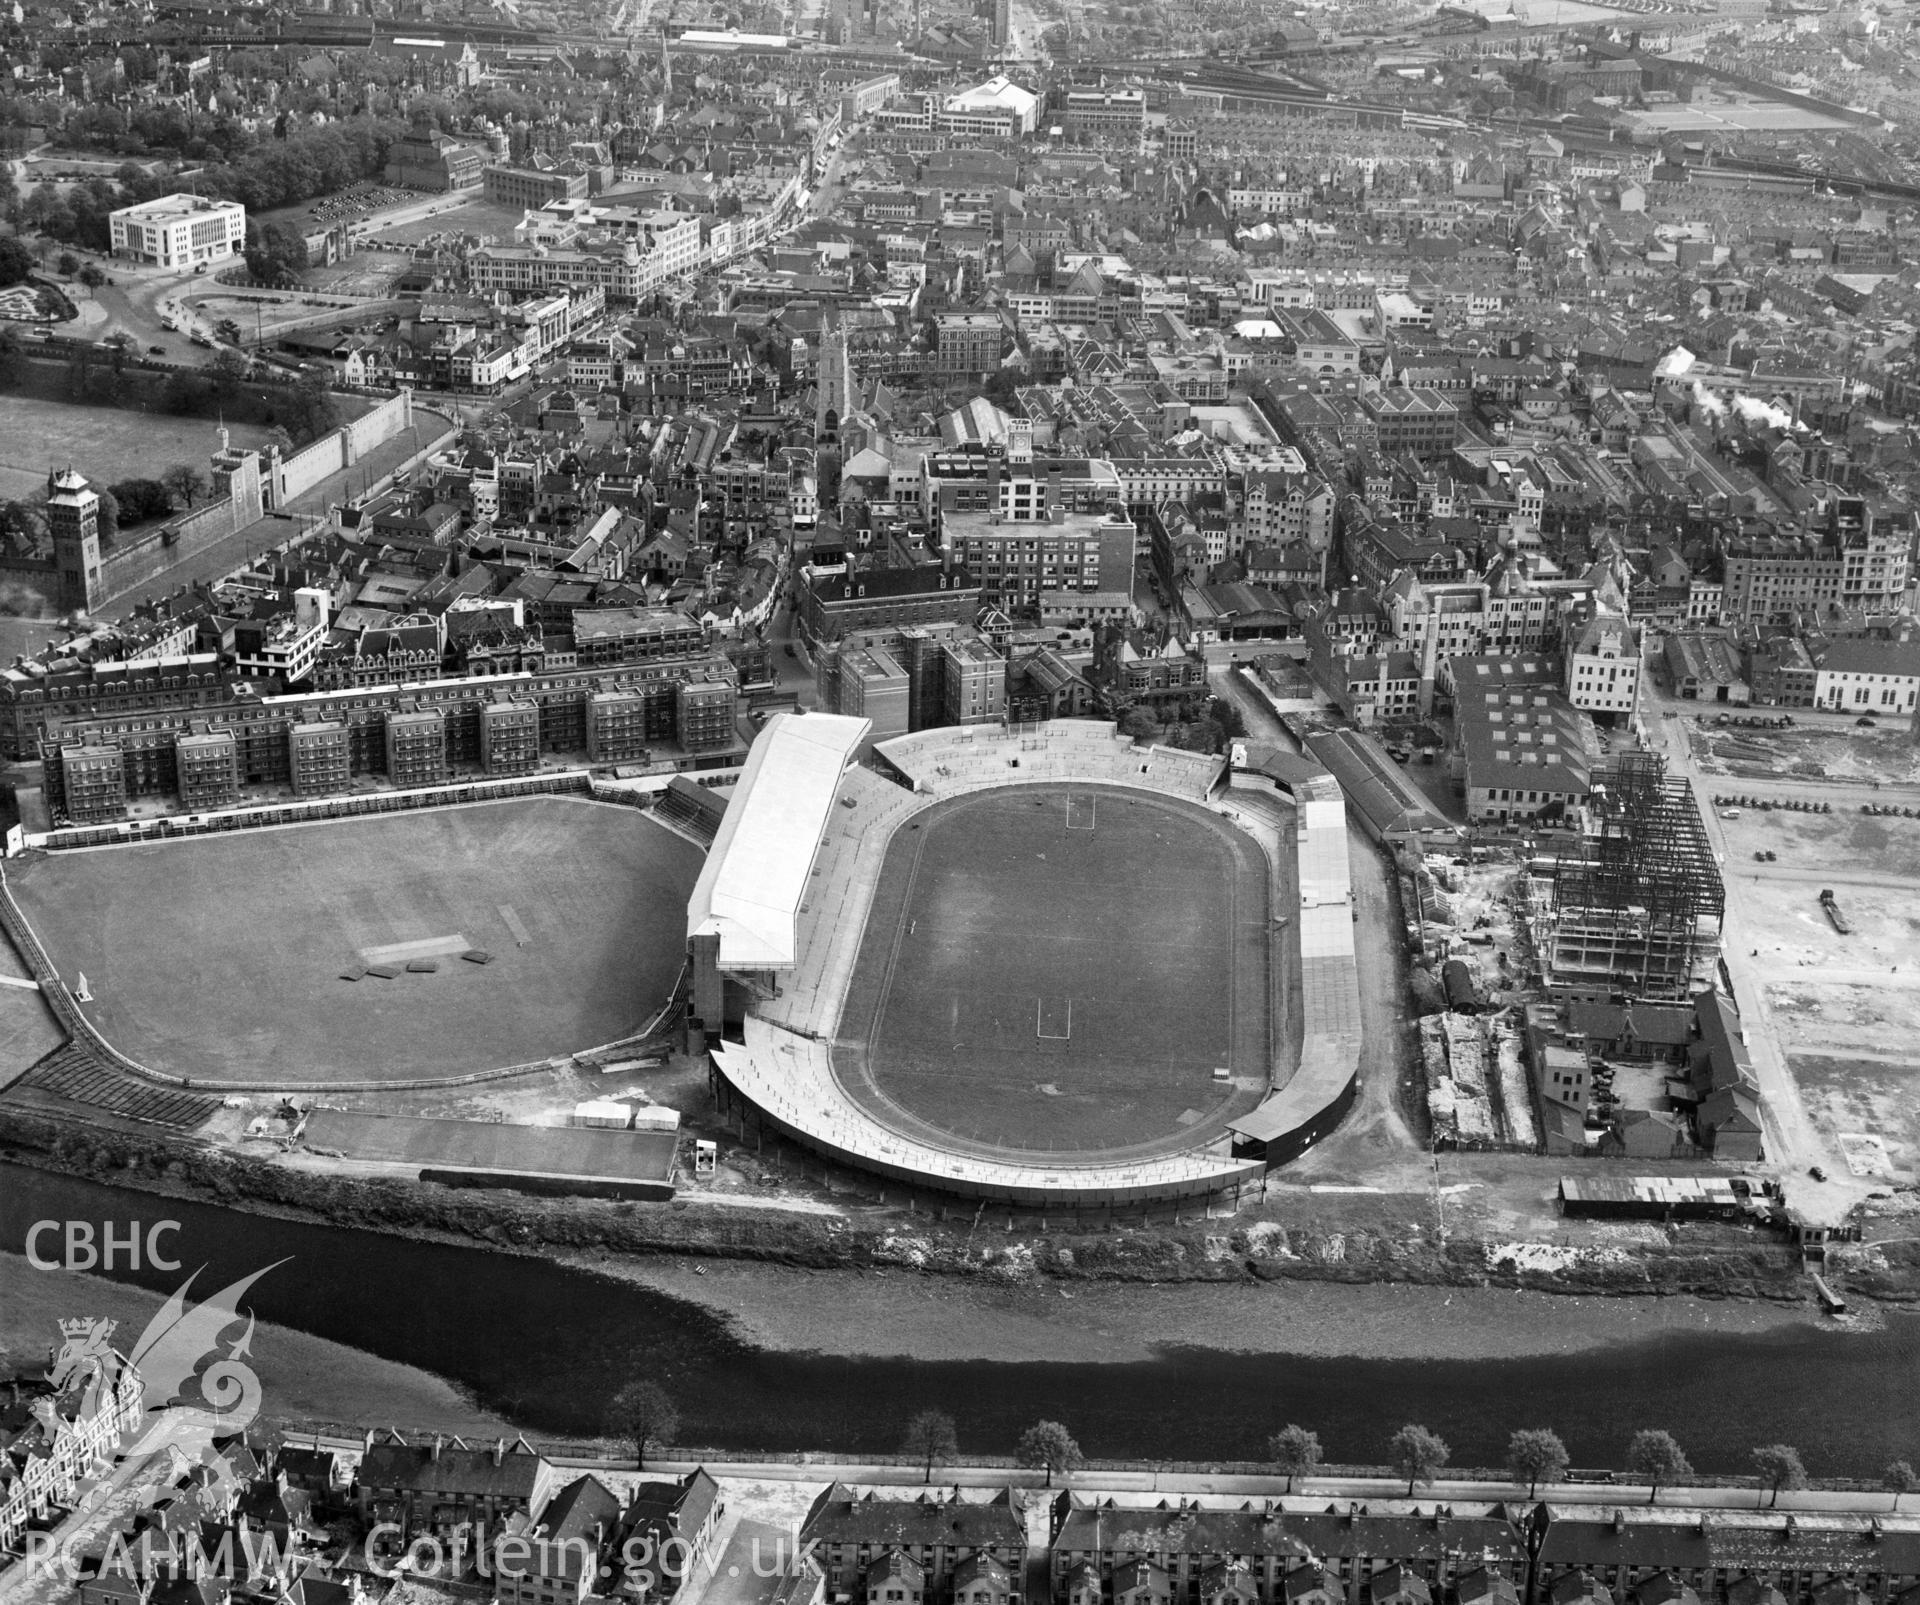 Digital copy of a black and white, oblique aerial photograph of Cardiff Arms Park, Cardiff. The photograph shows a view from the West following the completion of the North Stand. On the right hand side of the photograph it iss possible to see Empire House, a telephone exchange, under construction on the site of the Temperance Town which was demolished by the Cardiff Corporation in 1937.